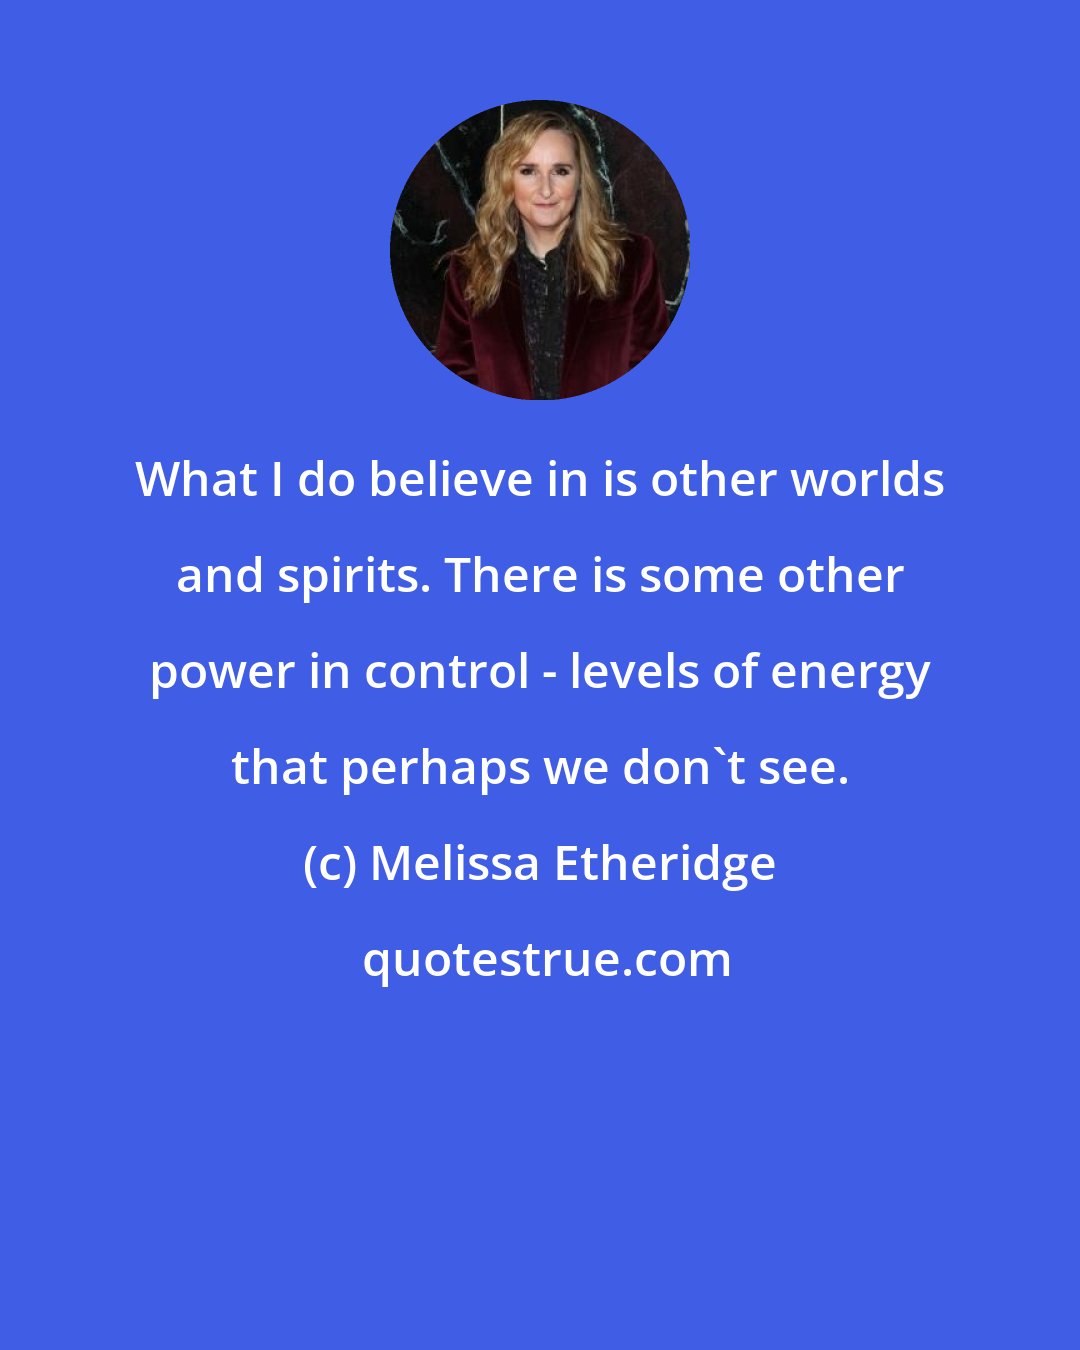 Melissa Etheridge: What I do believe in is other worlds and spirits. There is some other power in control - levels of energy that perhaps we don't see.